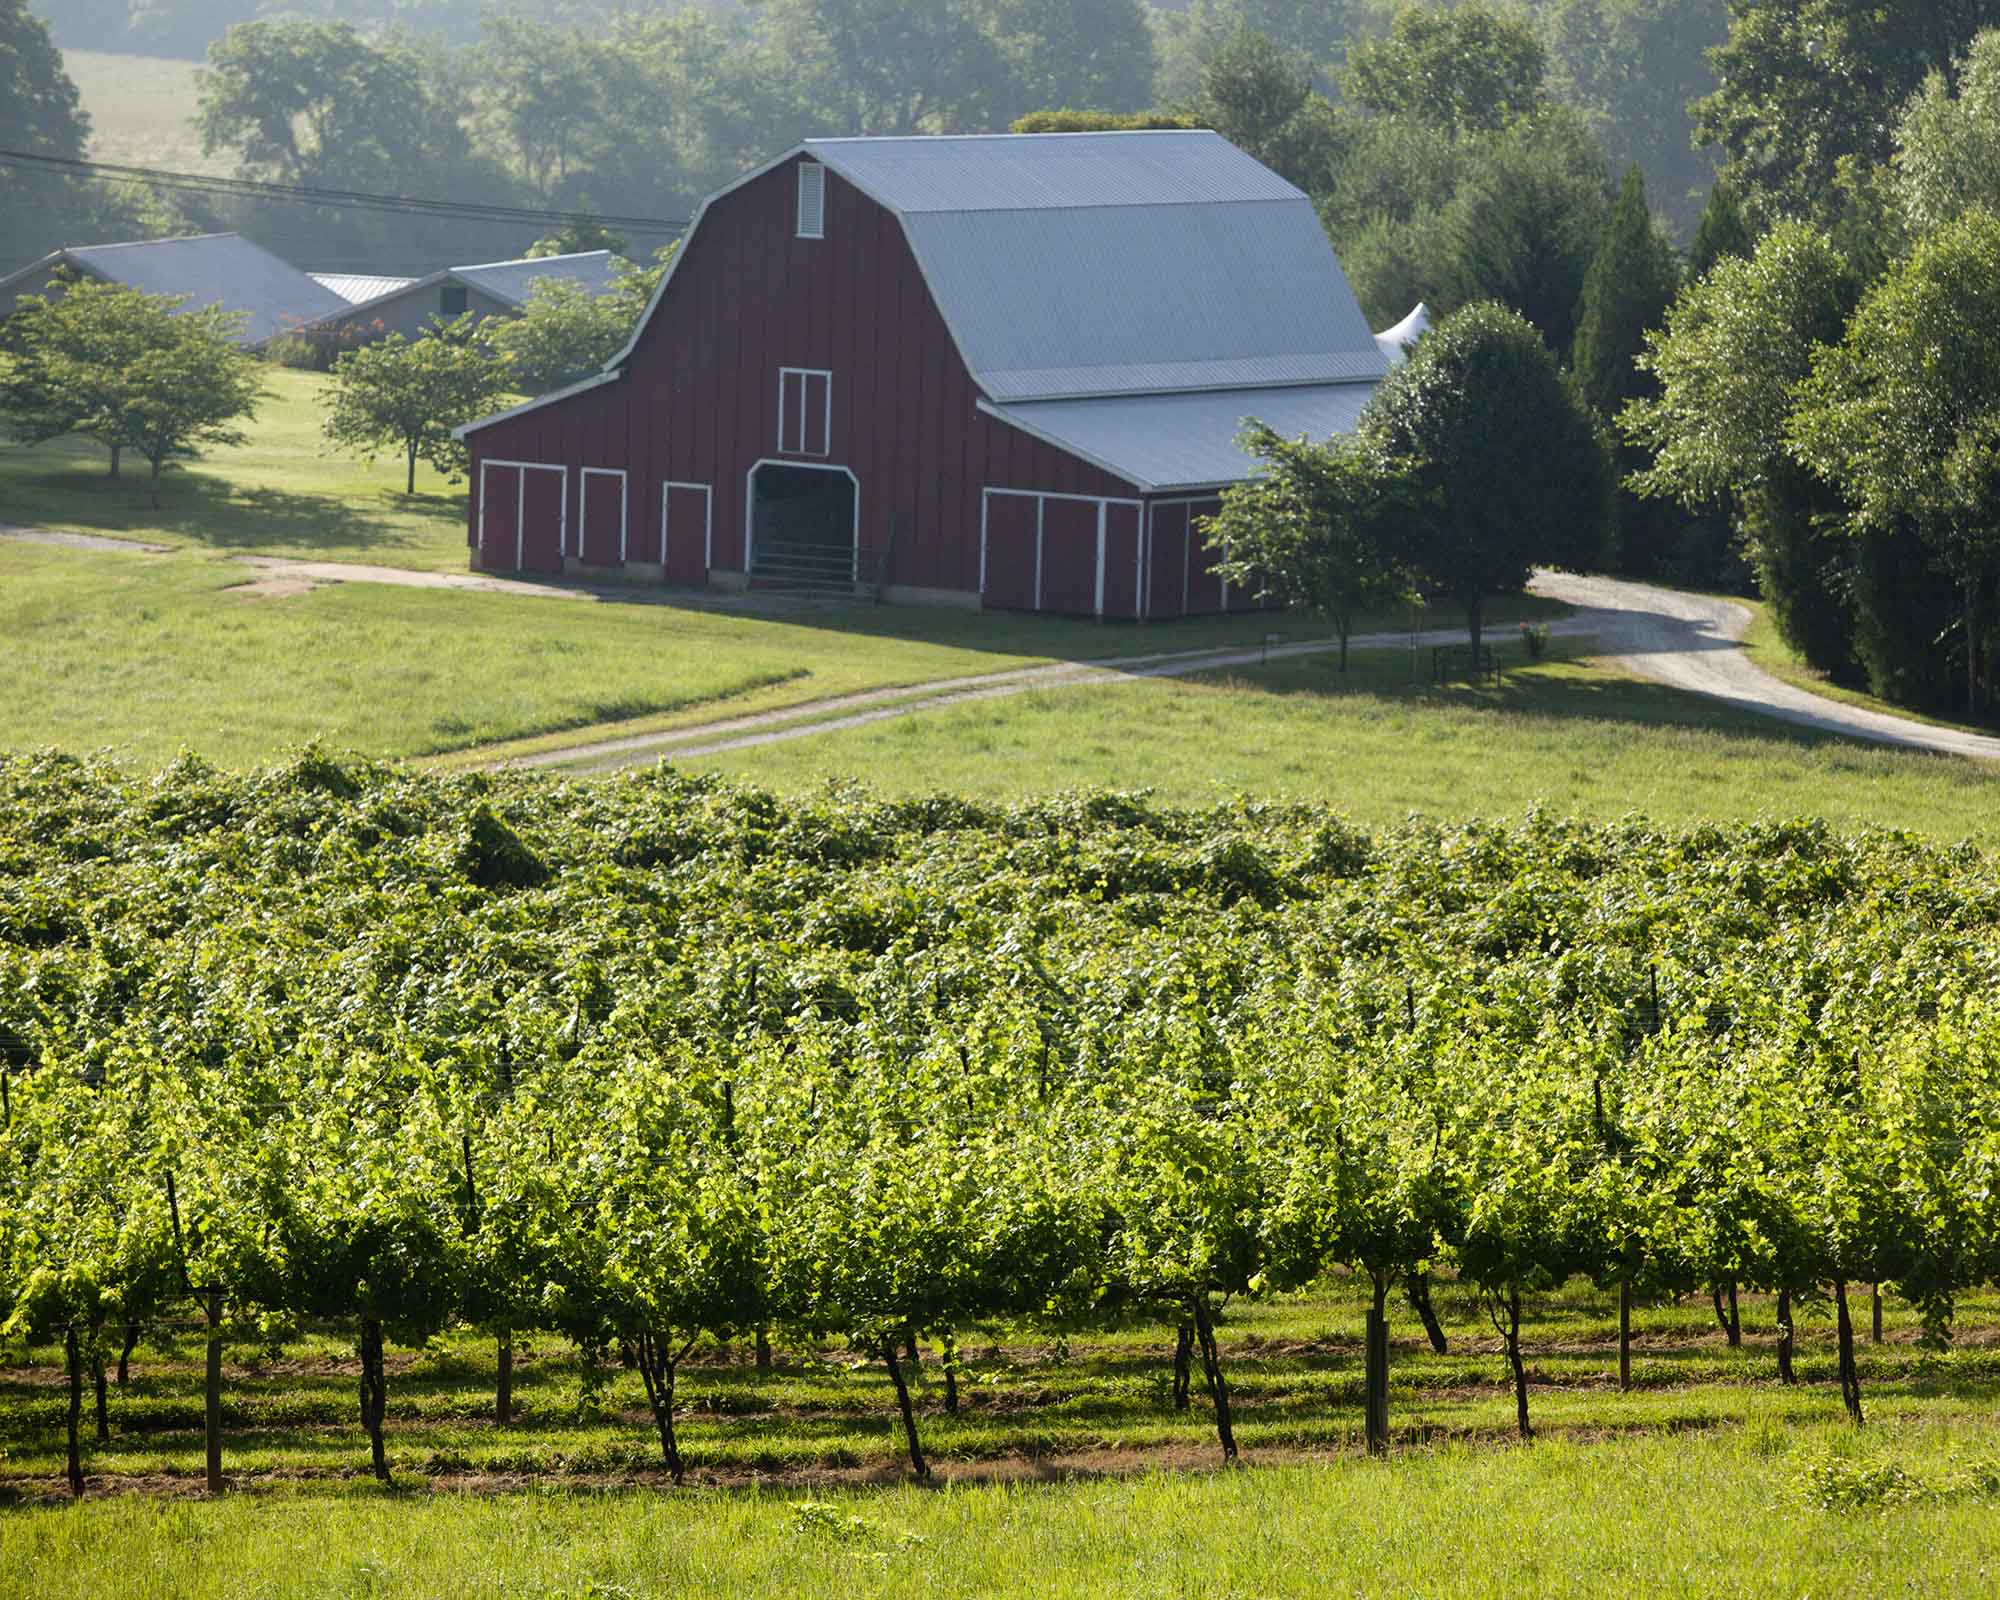 Agritourism has been steadily growing in Georgia over the past decade, and a new consumer survey by UGA economists shows that rural travel and agritourism is expected to rise in 2021, rebounding quicker than urban markets. (file photo)